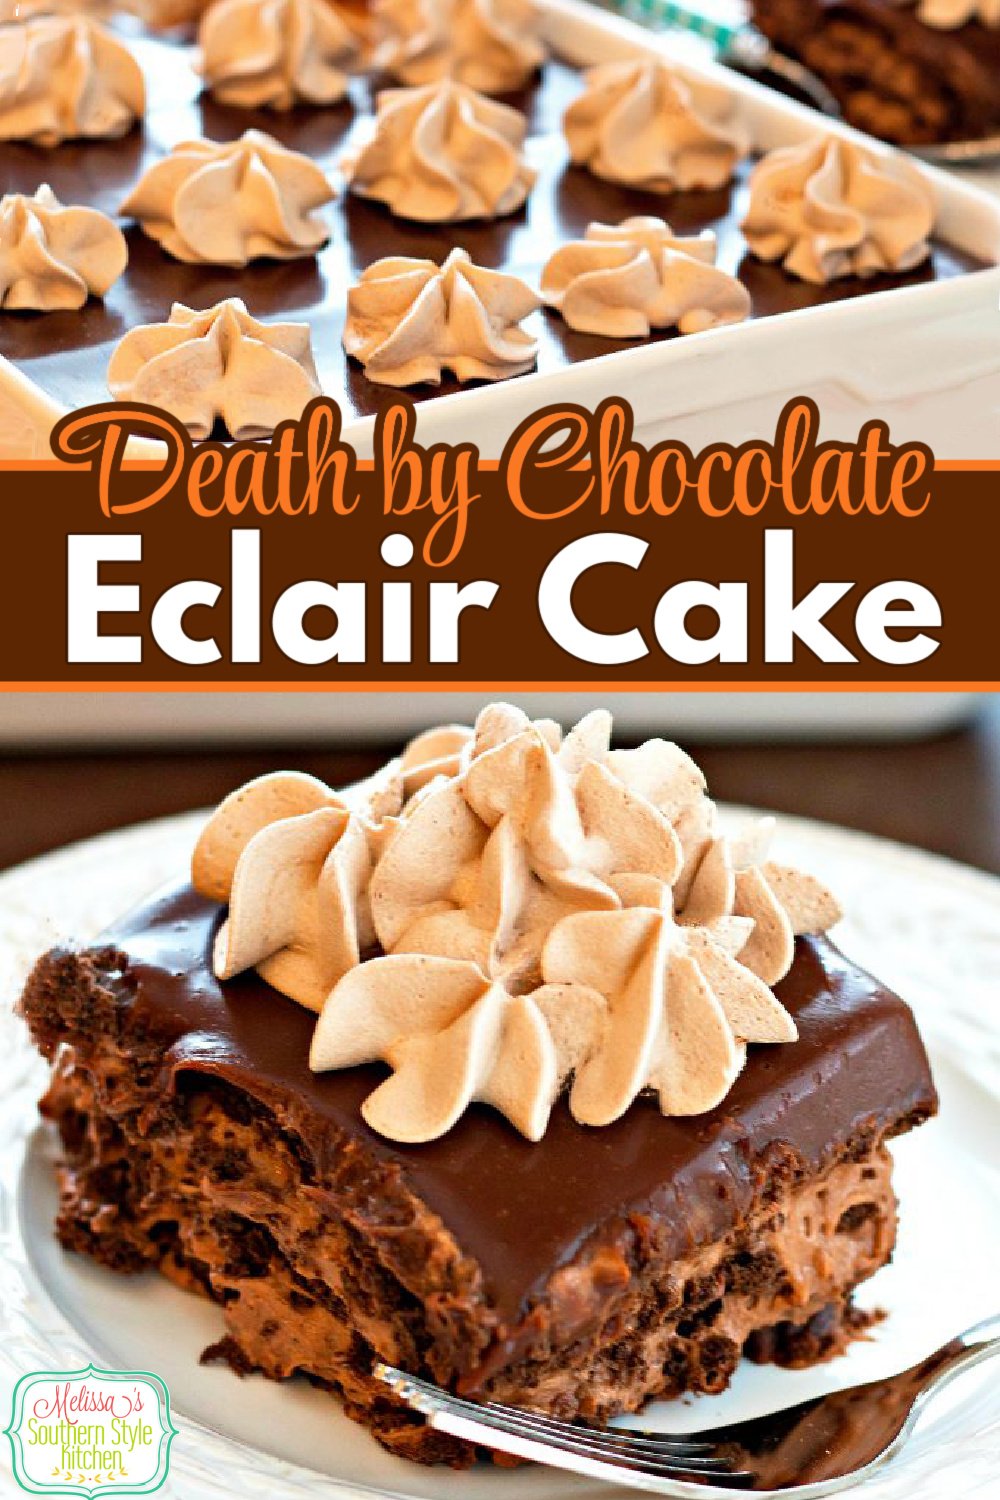 The perfect dessert for chocolate lovers to savor each and every decadent layer of this Death by Chocolate Eclair Cake #chocolateeclaircake #chocolatecake #eclaircake #cakes #cakerecipes #chocolatedessertrecipes #desserts #dessertfoodrecipes #nobakedesserts #southernfood #southernrecipes via @melissasssk